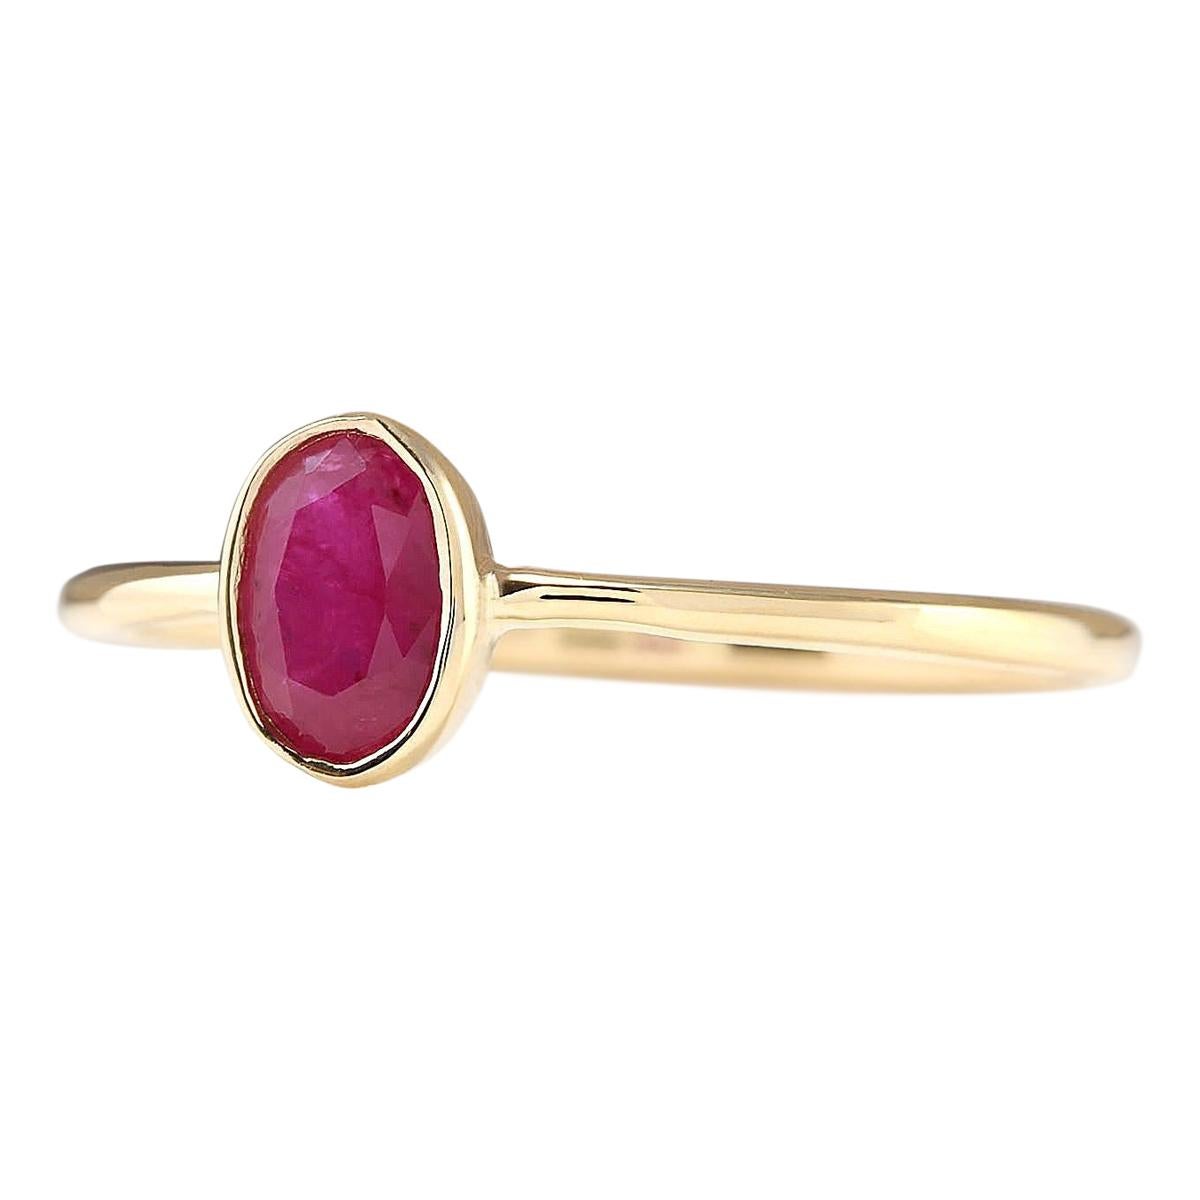 Stamped: 18K Yellow Gold
Total Ring Weight: 1.3 Grams
Ring Length: N/A
Ring Width: N/A
Gemstone Weight: Total Natural Ruby Weight is 0.60 Carat (Measures: 6.55x5.10 mm)
Color: Red
Face Measures: 6.55x5.10 mm
Sku: [703211W]